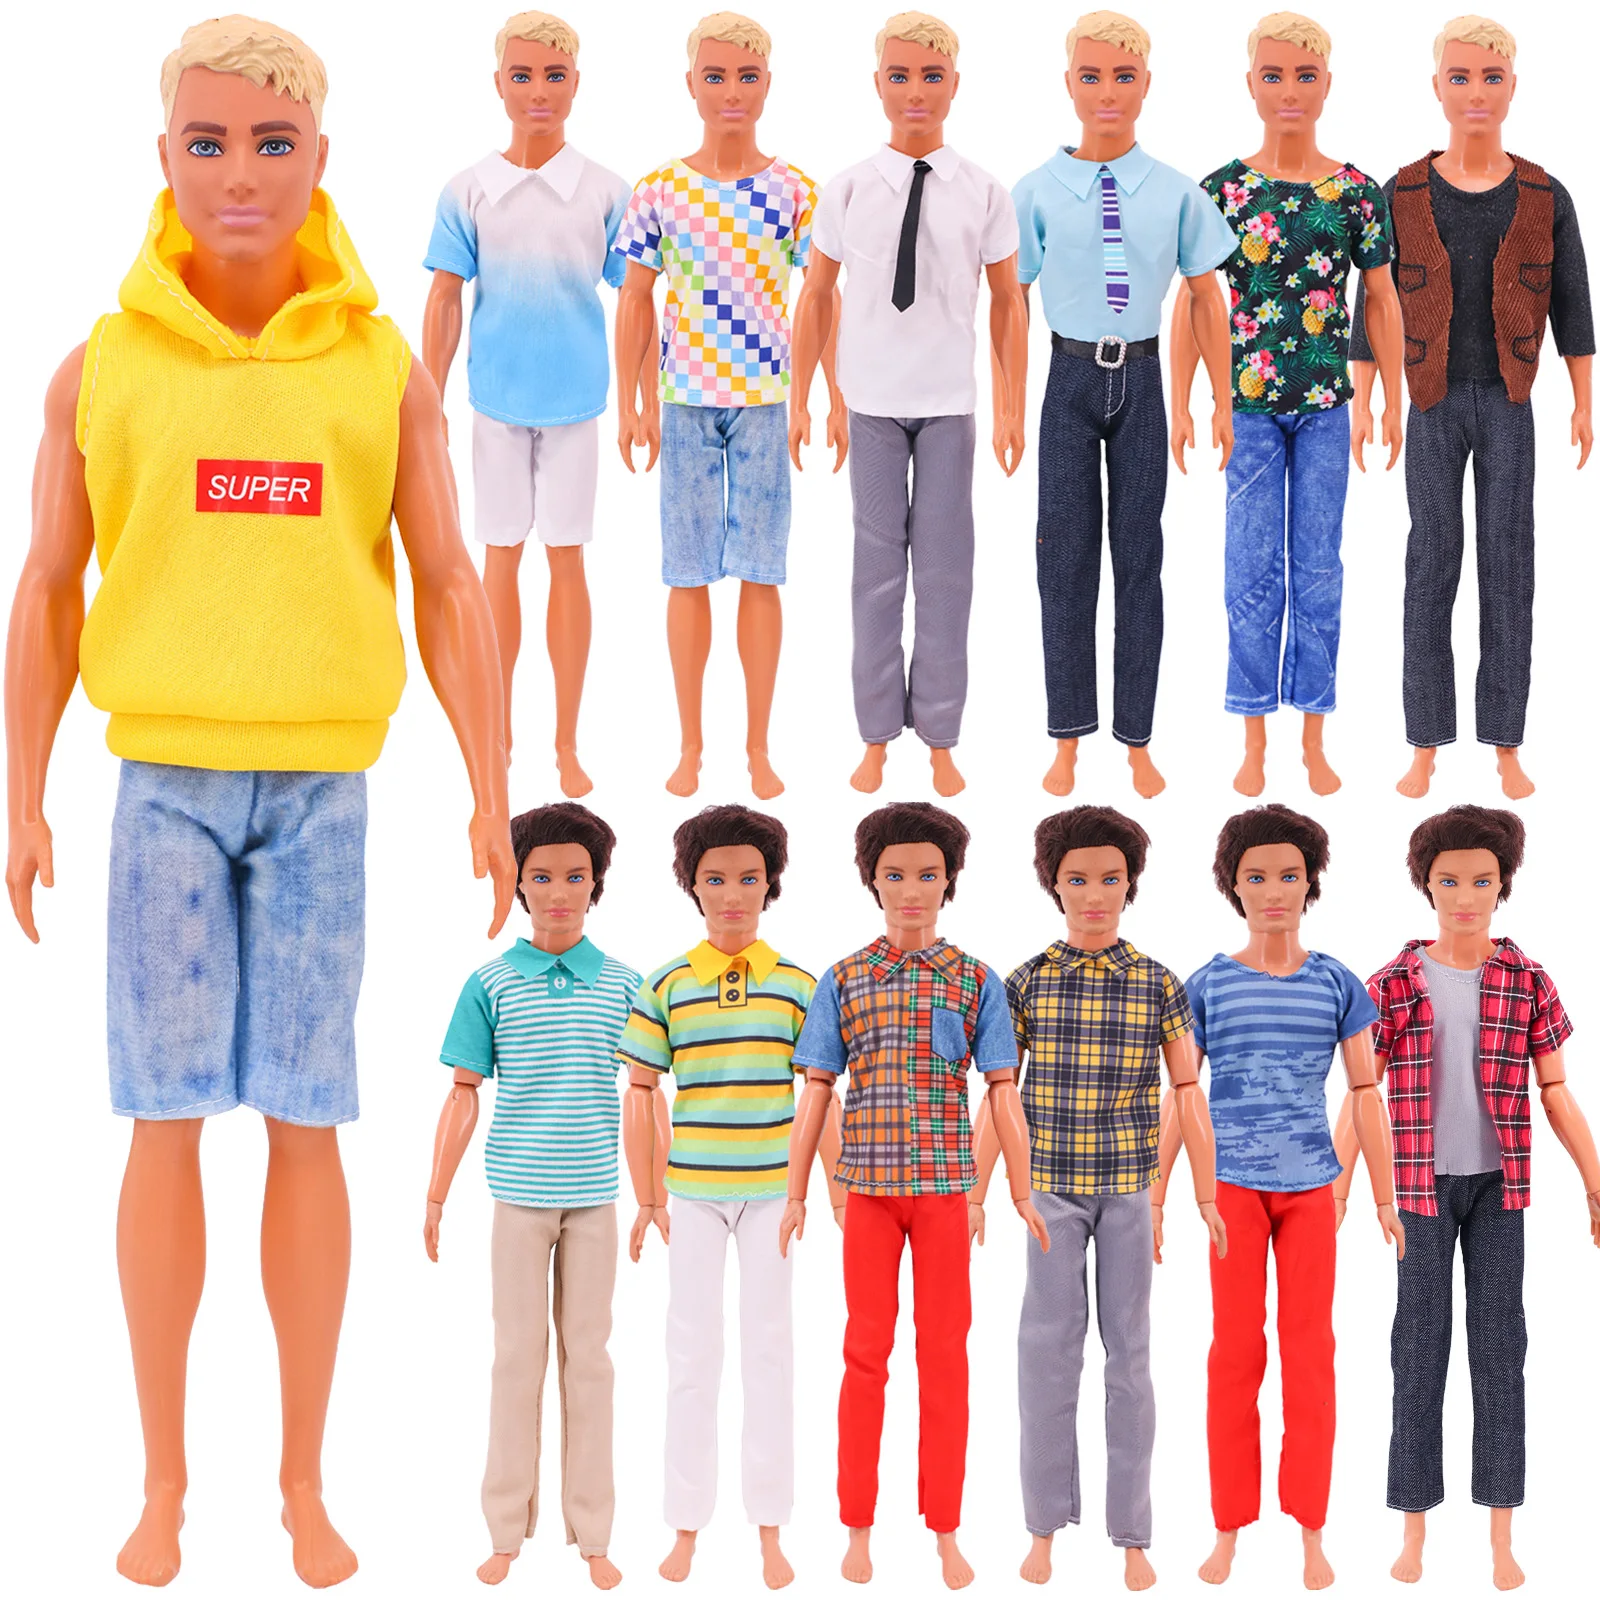 Ken Boy Doll Clothes Handmade Hoodie Shirt Short Sleeve Trousers Fashion Summer New Product For 11.8 Inch Boy Dolls Children Toy ronaldo printed children s sweater suit autumn and winter fleece hoodie trousers 2 piece casual children s clothing